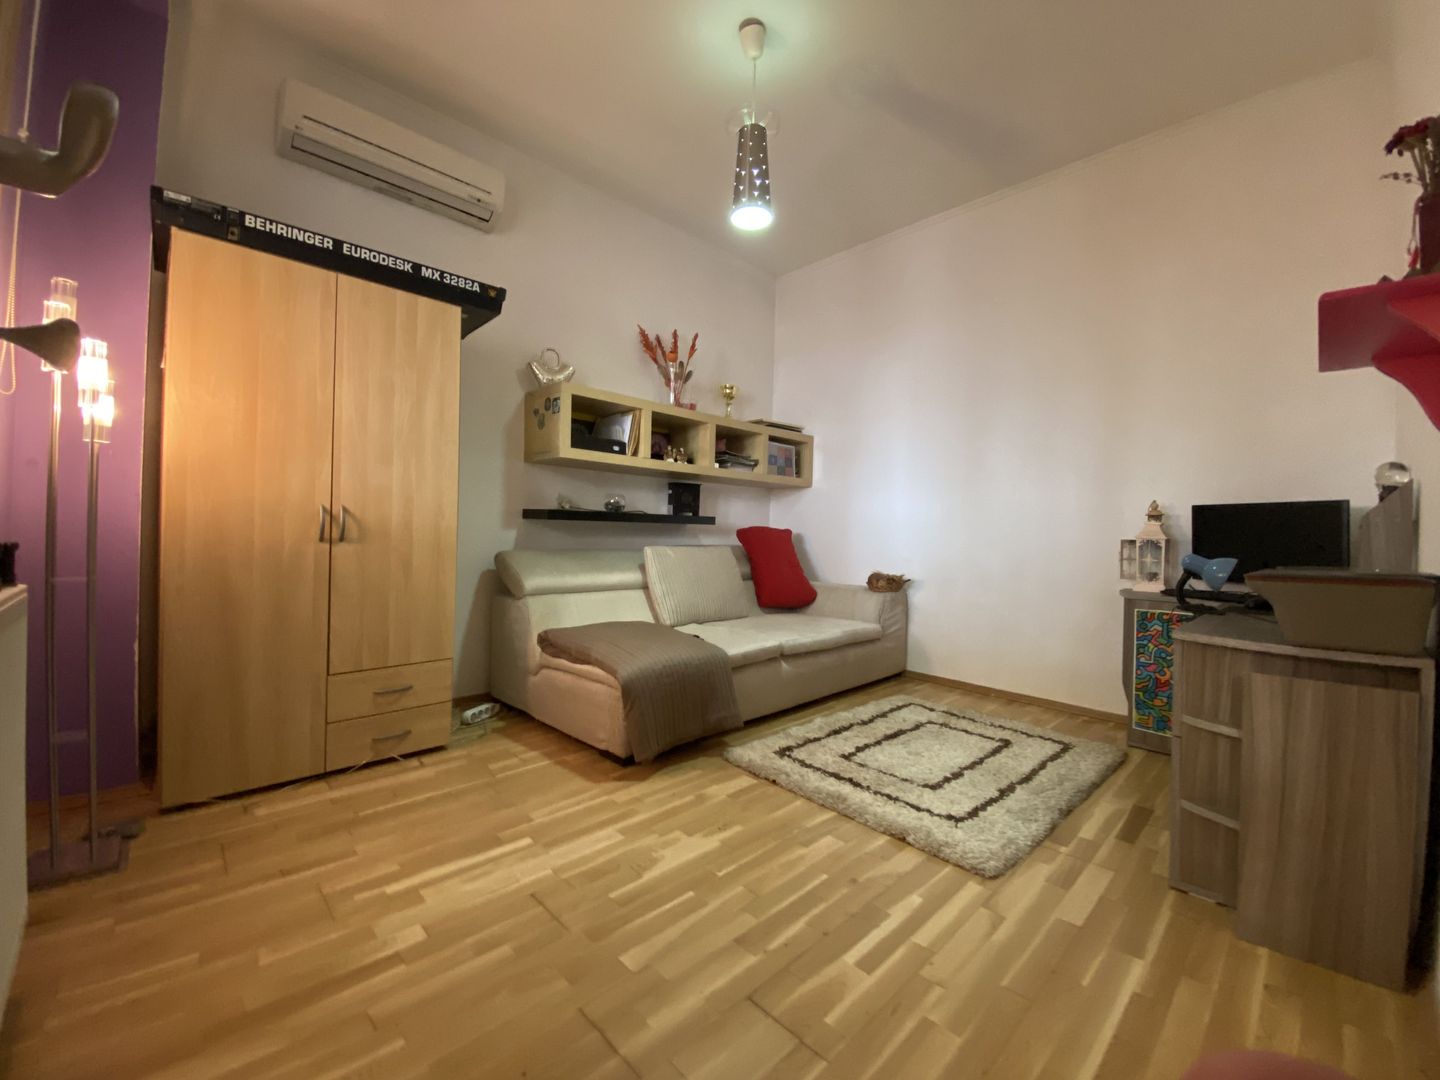 3 room Apartment for rent, Baneasa area